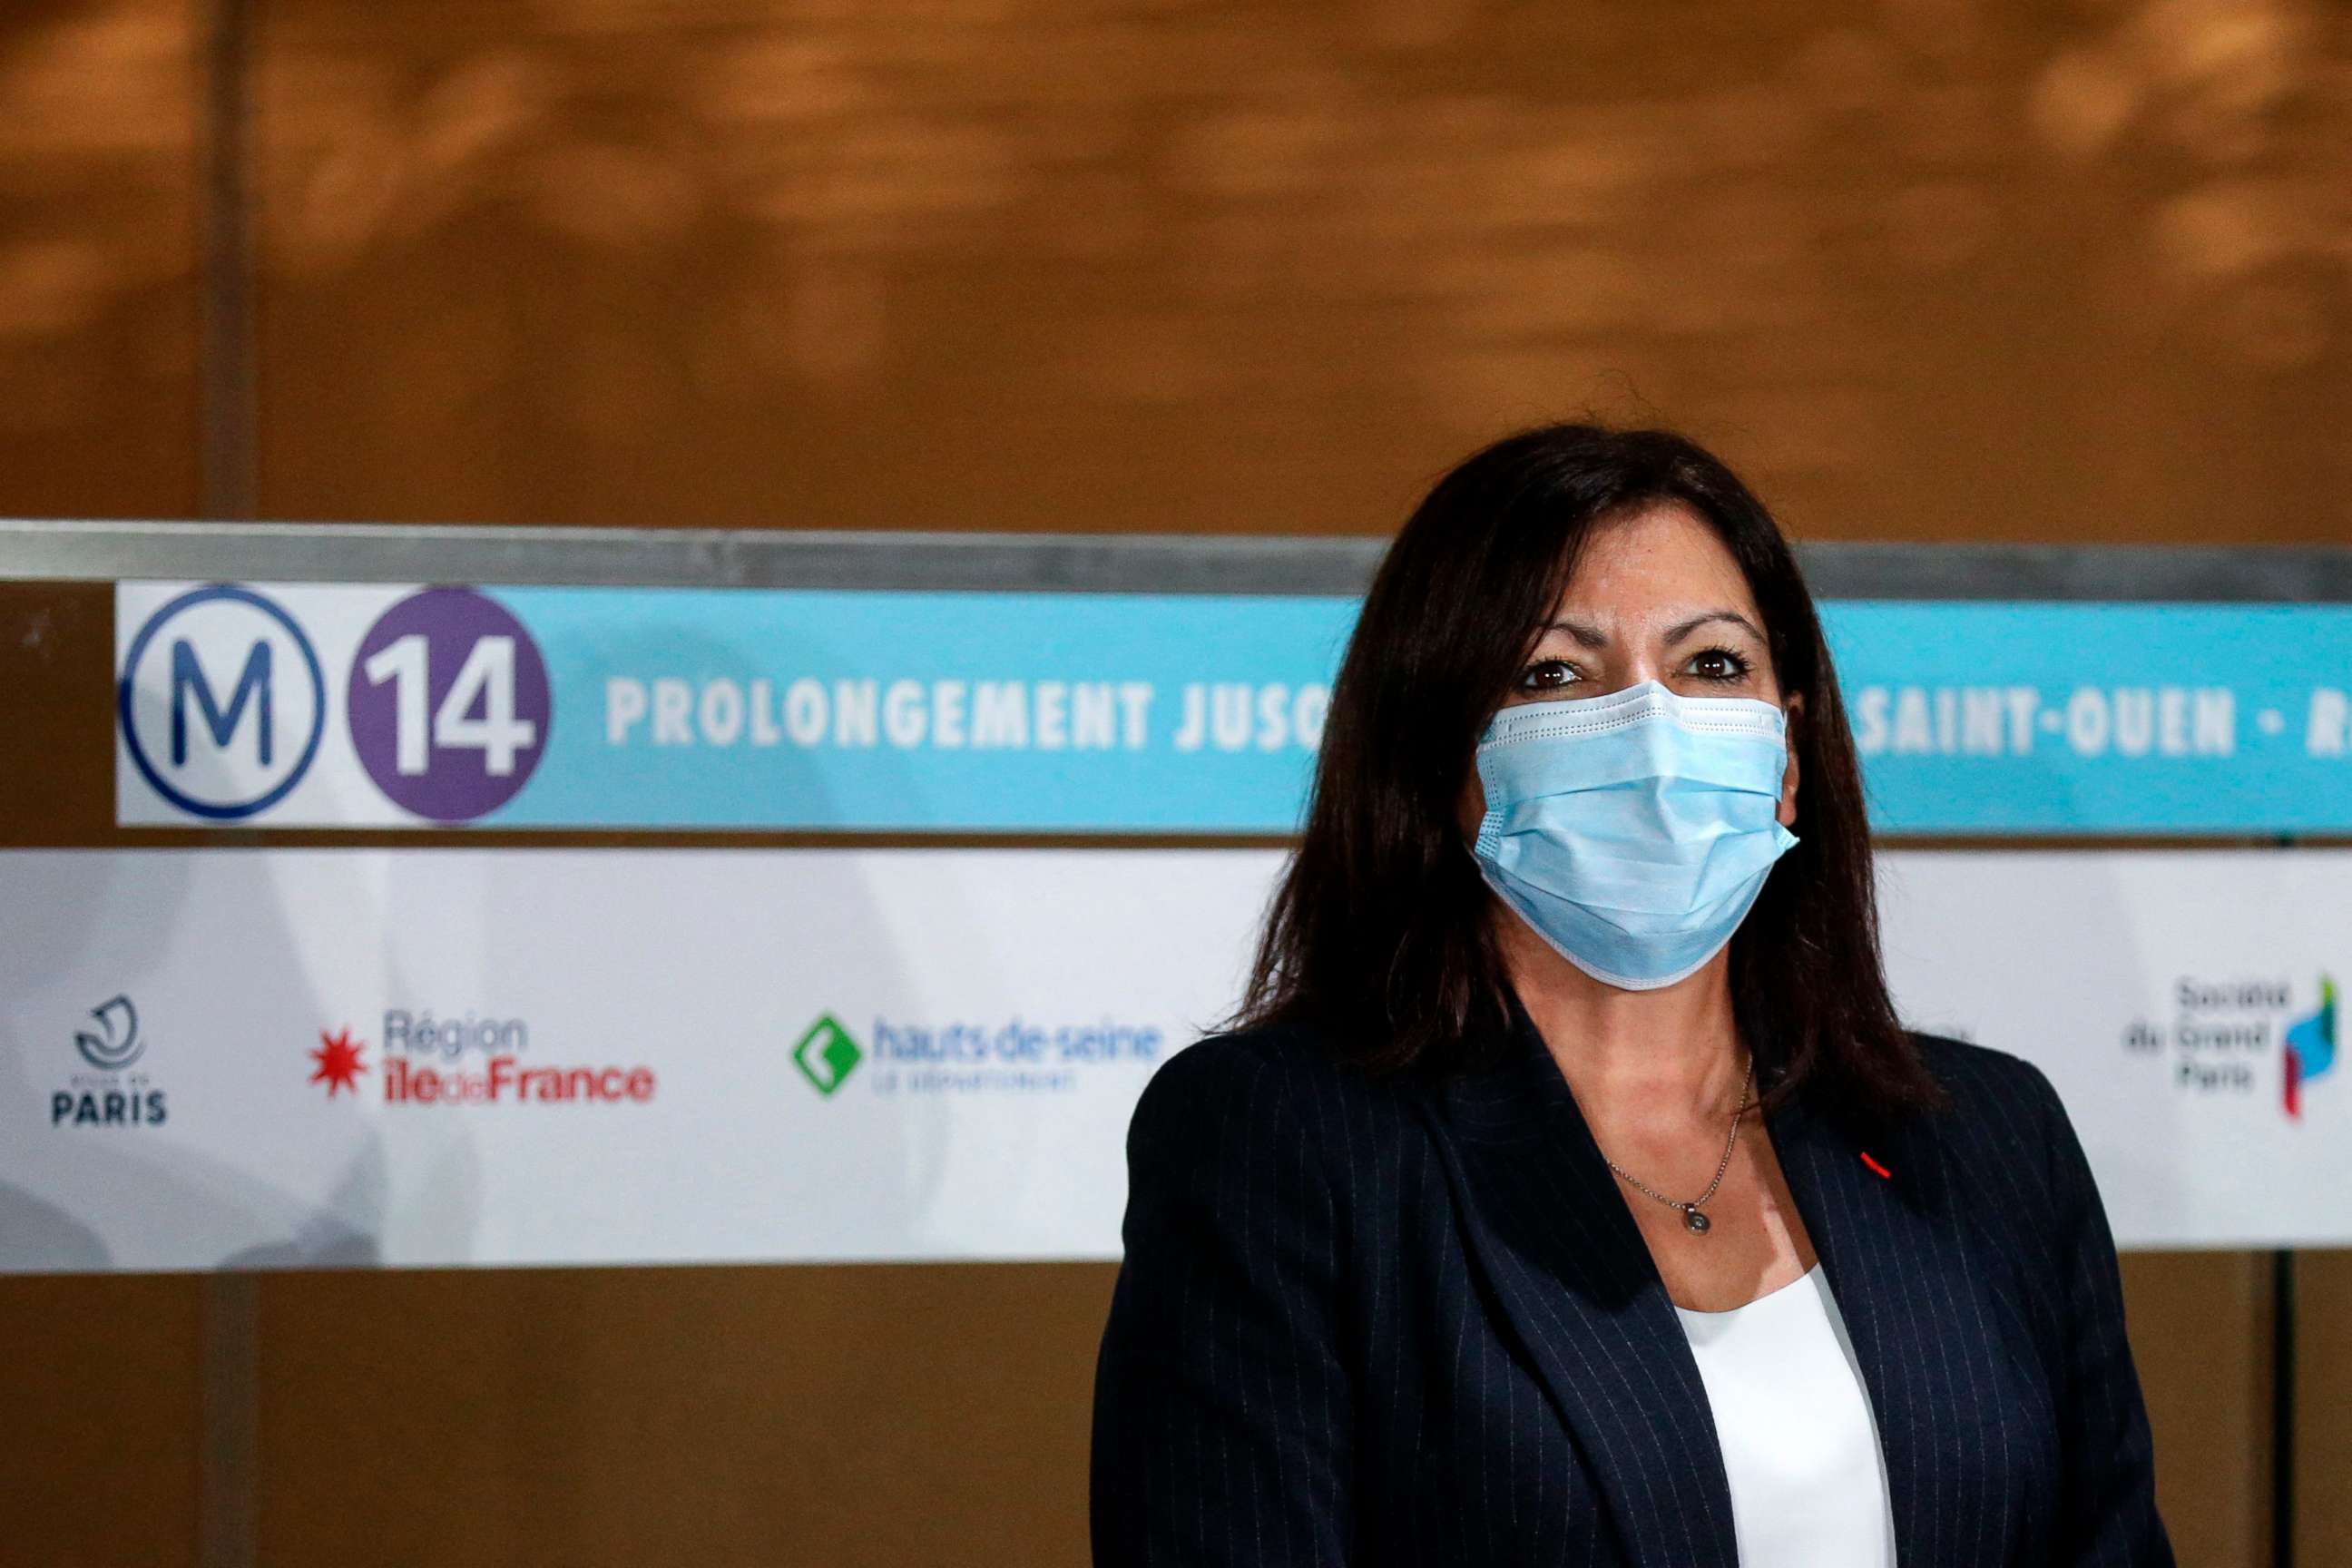 PHOTO: Paris Mayor Anne Hidalgo attends the inauguration of the extension of the Metro line in Paris, Dec. 14, 2020.